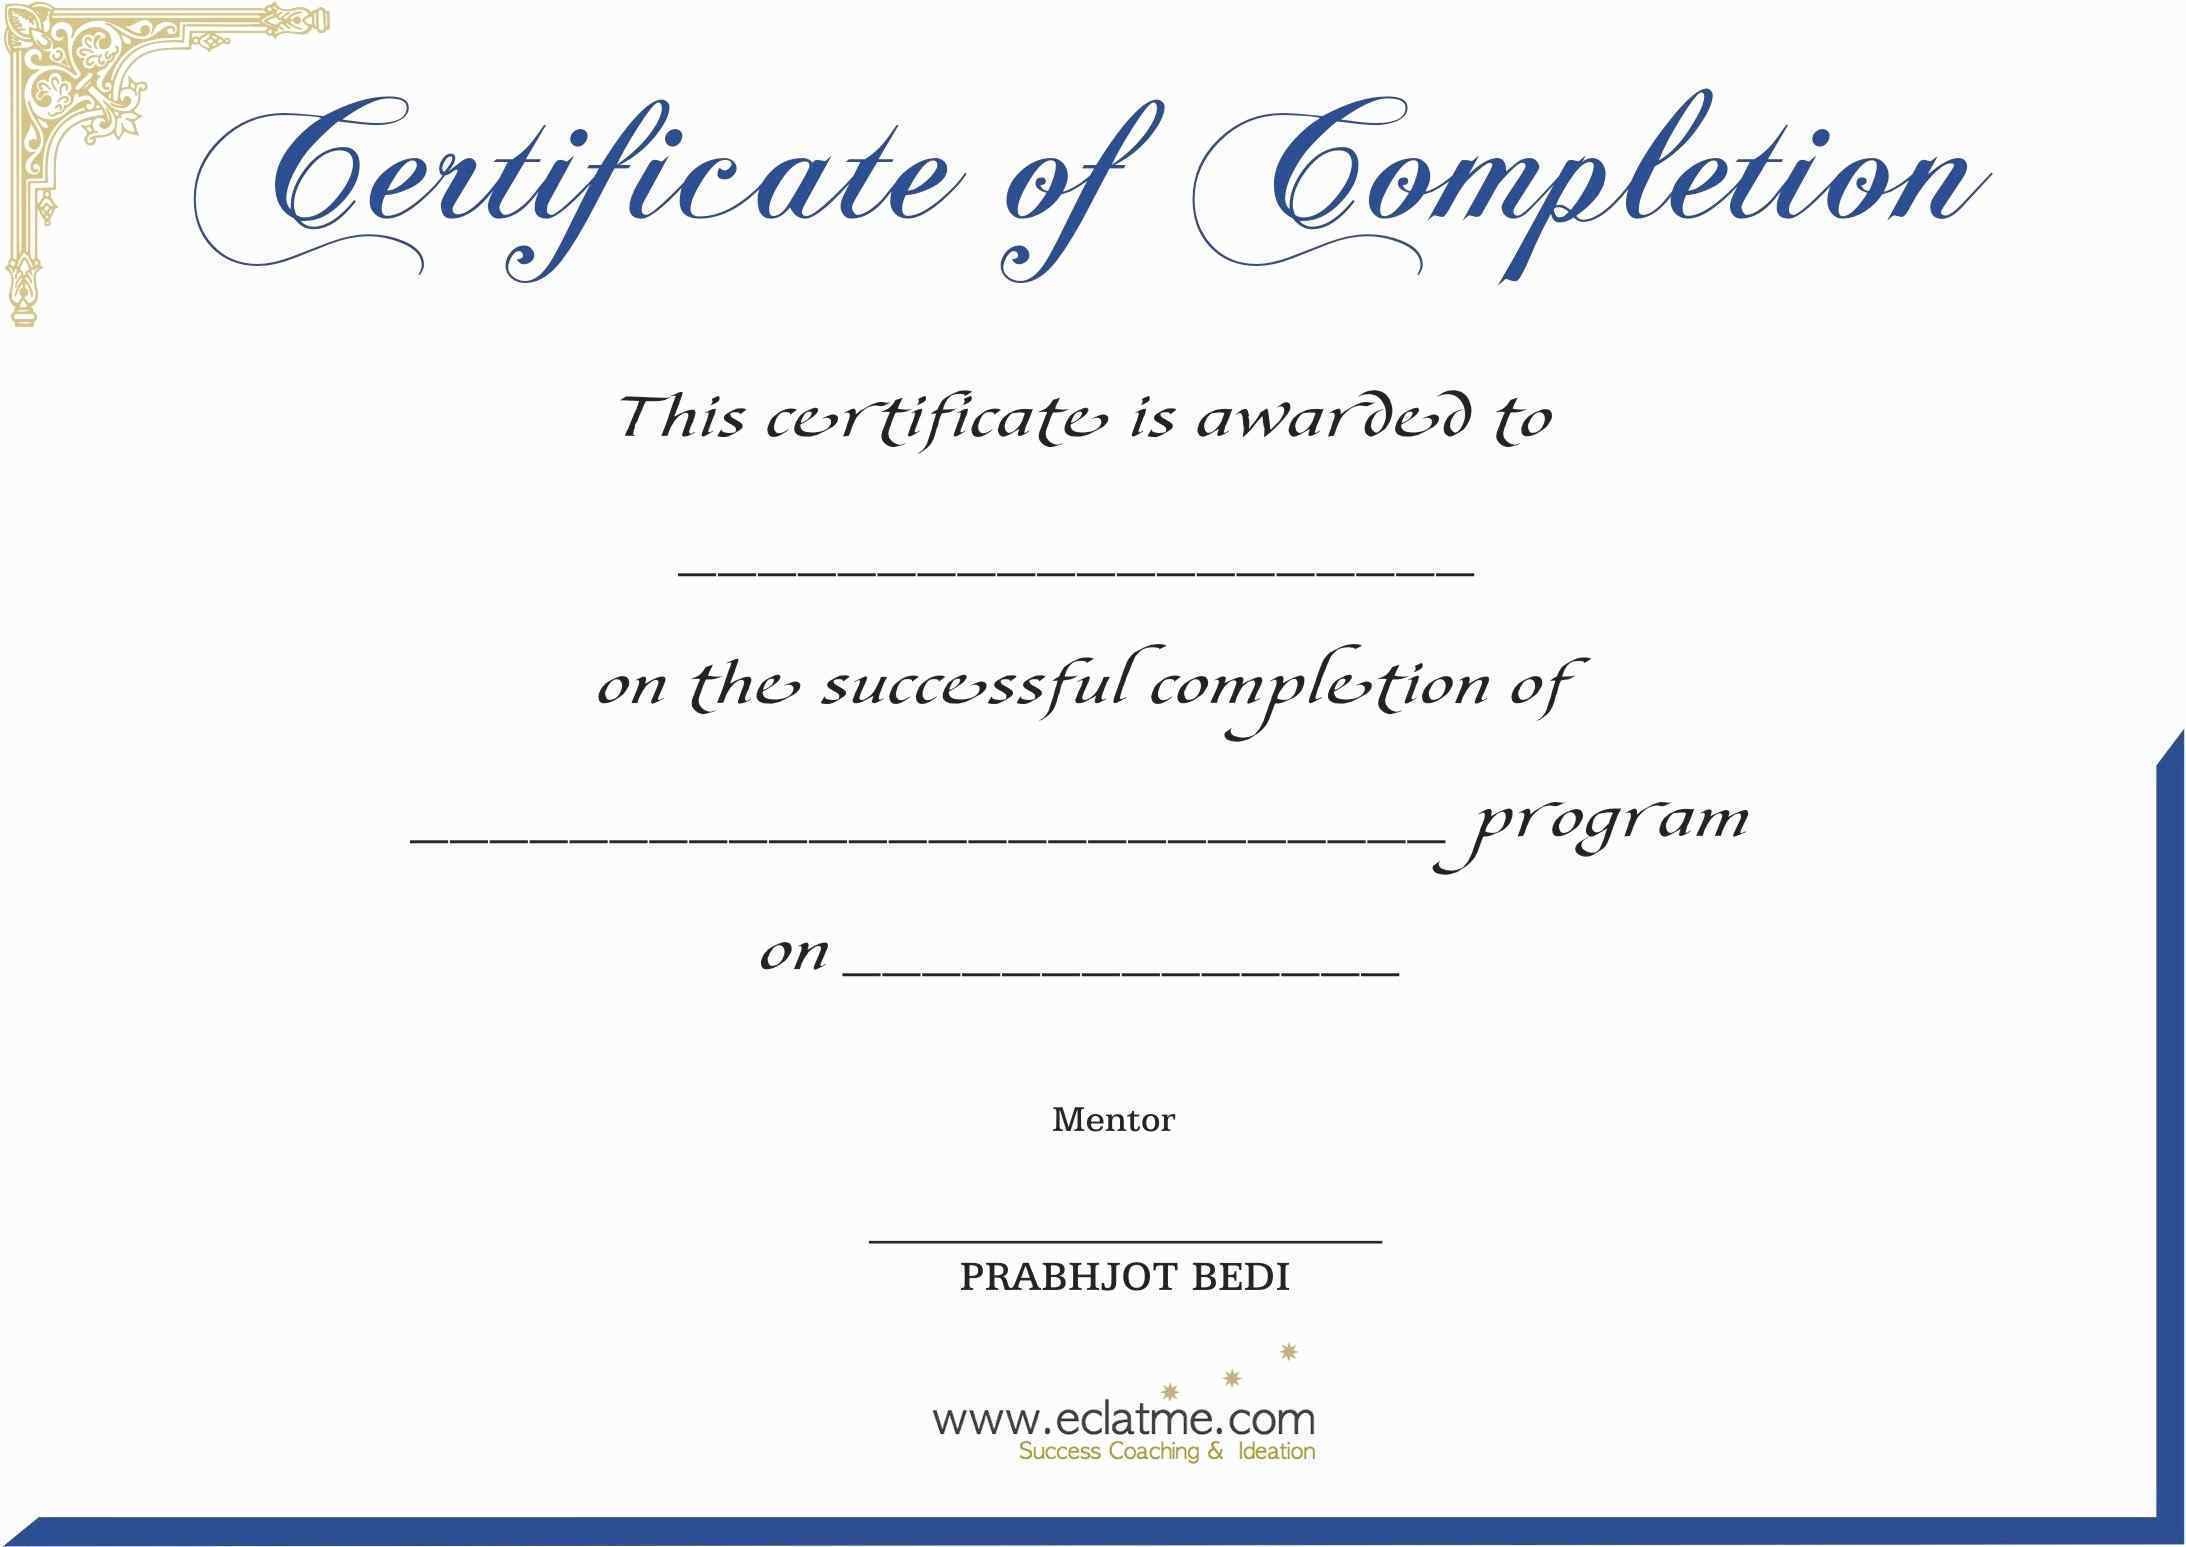 Certificate Of Completion Templates Free Printable Luxury In - Certificate Of Completion Template Free Printable